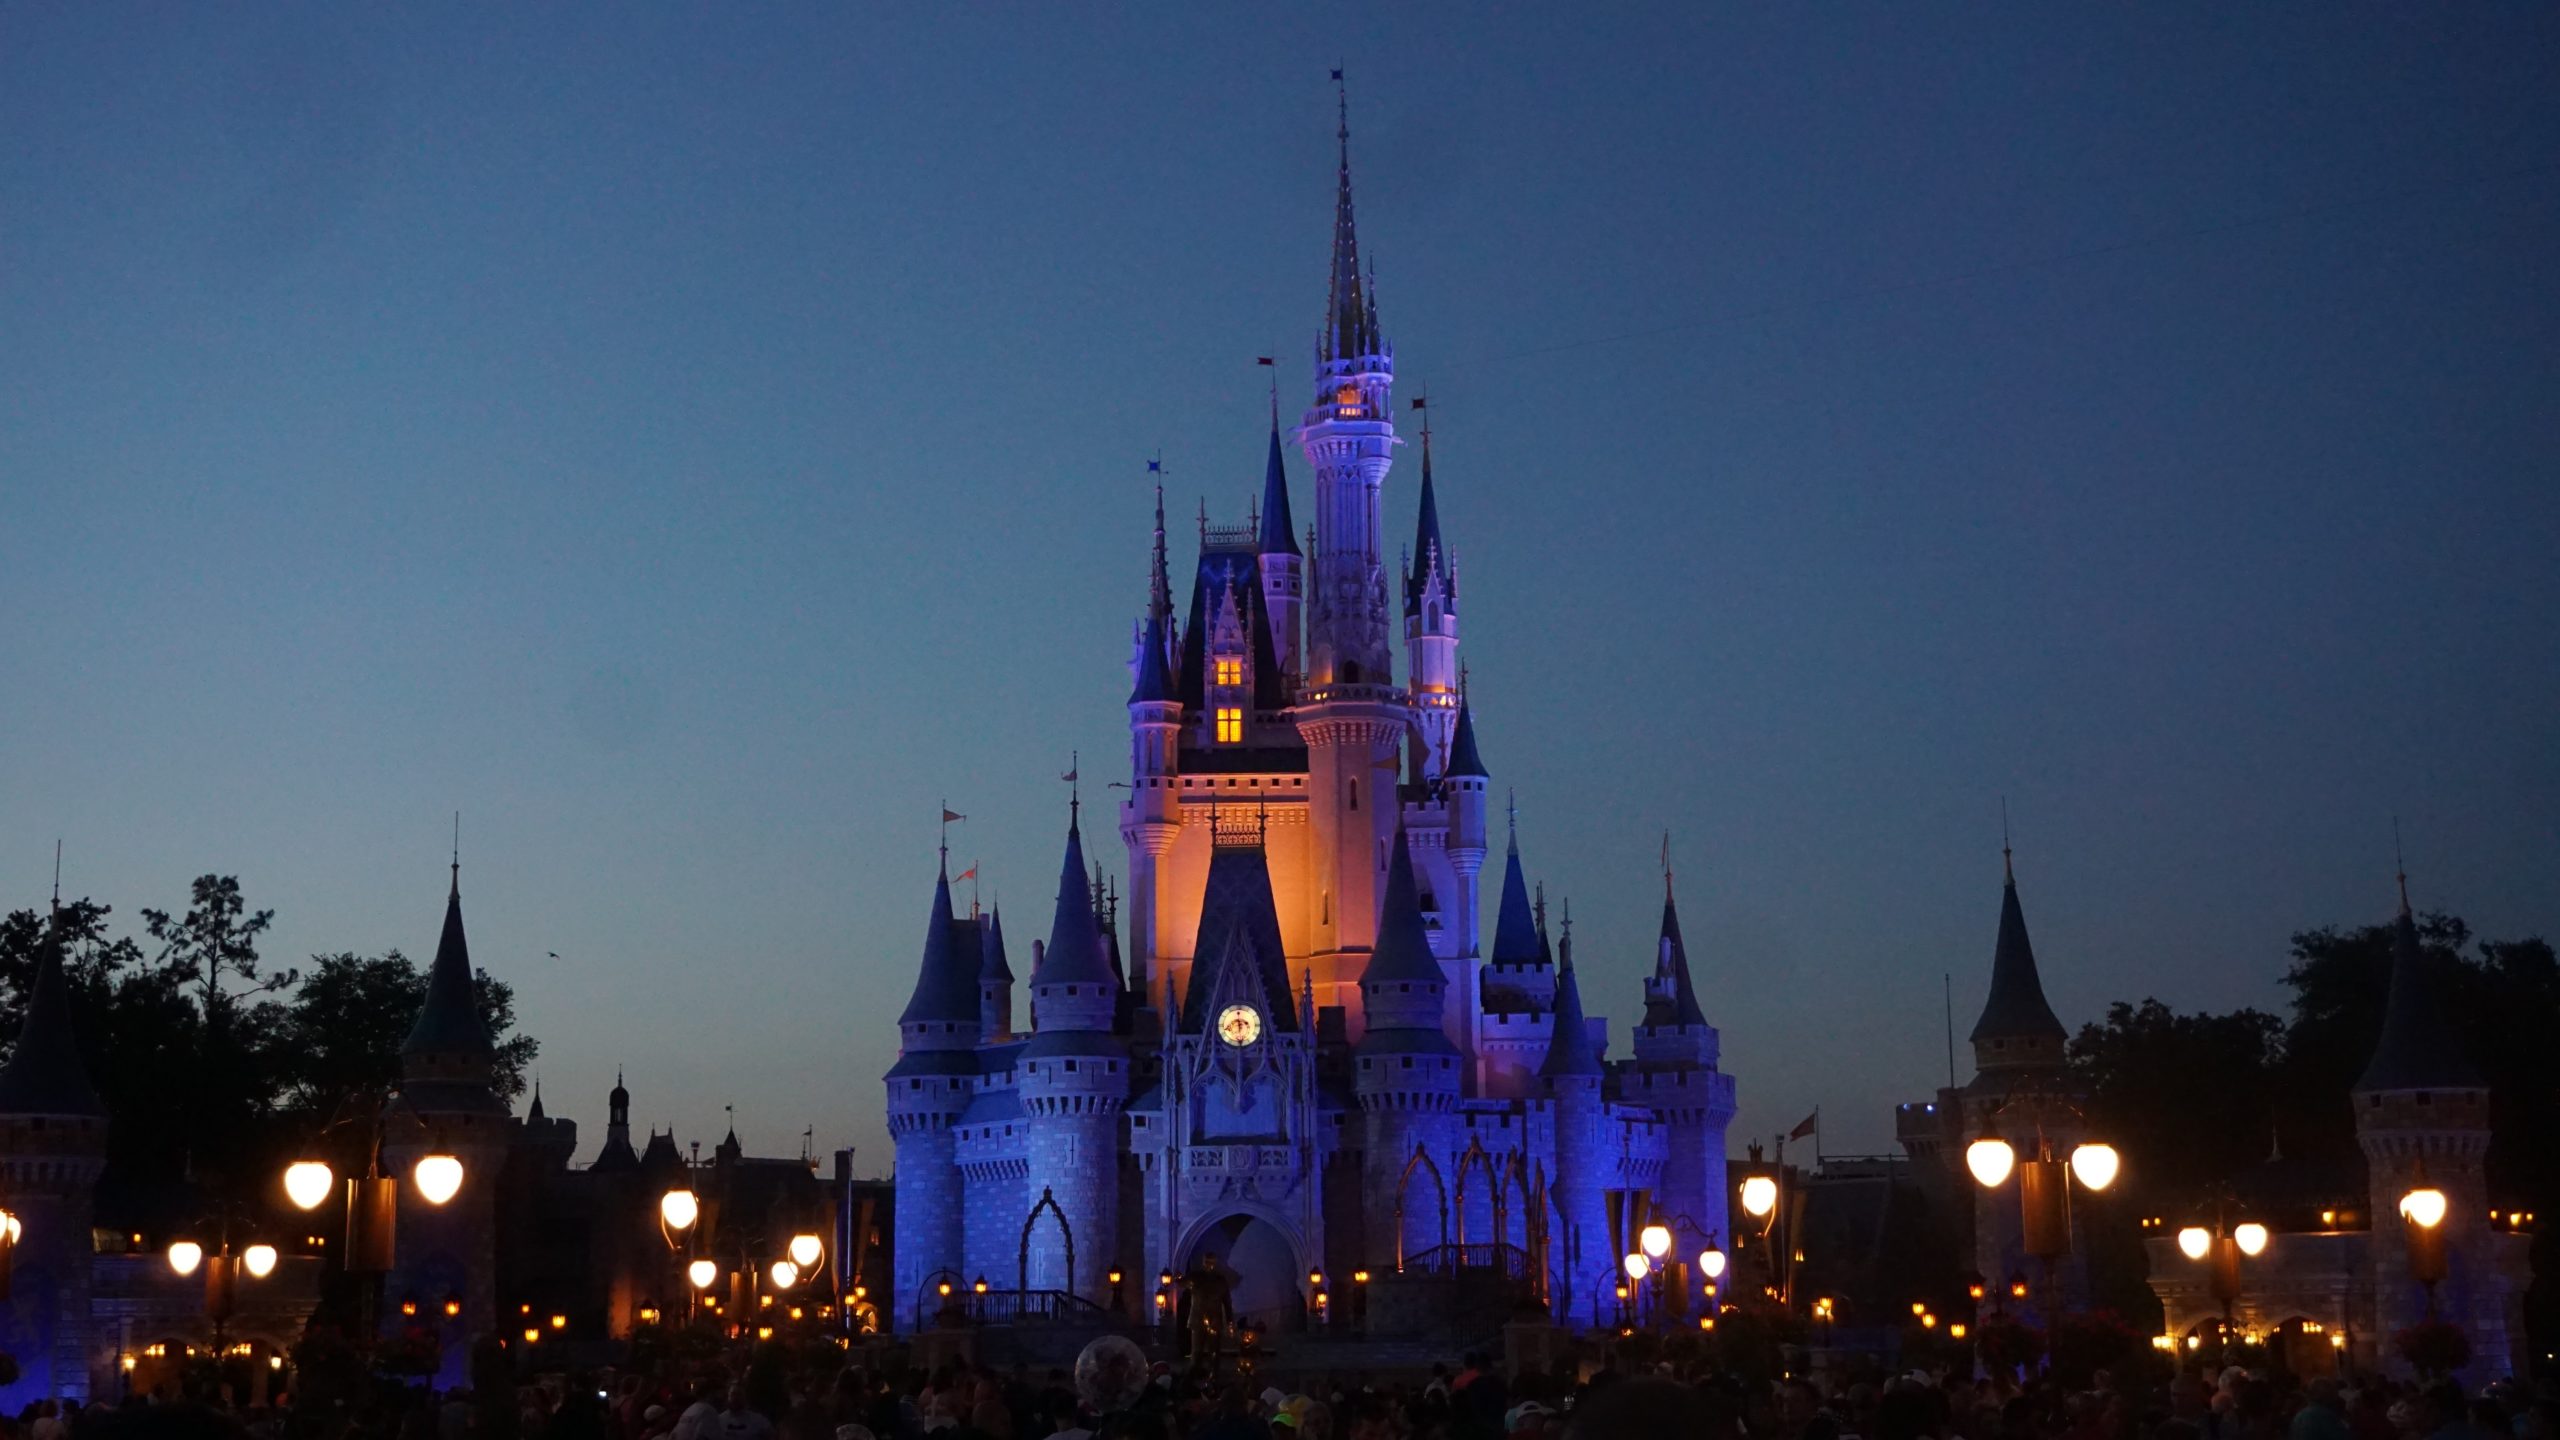 Image of Cinderella's Castle at Disney. Going to a Disney park outside the US is one of my travel goals for 2022.